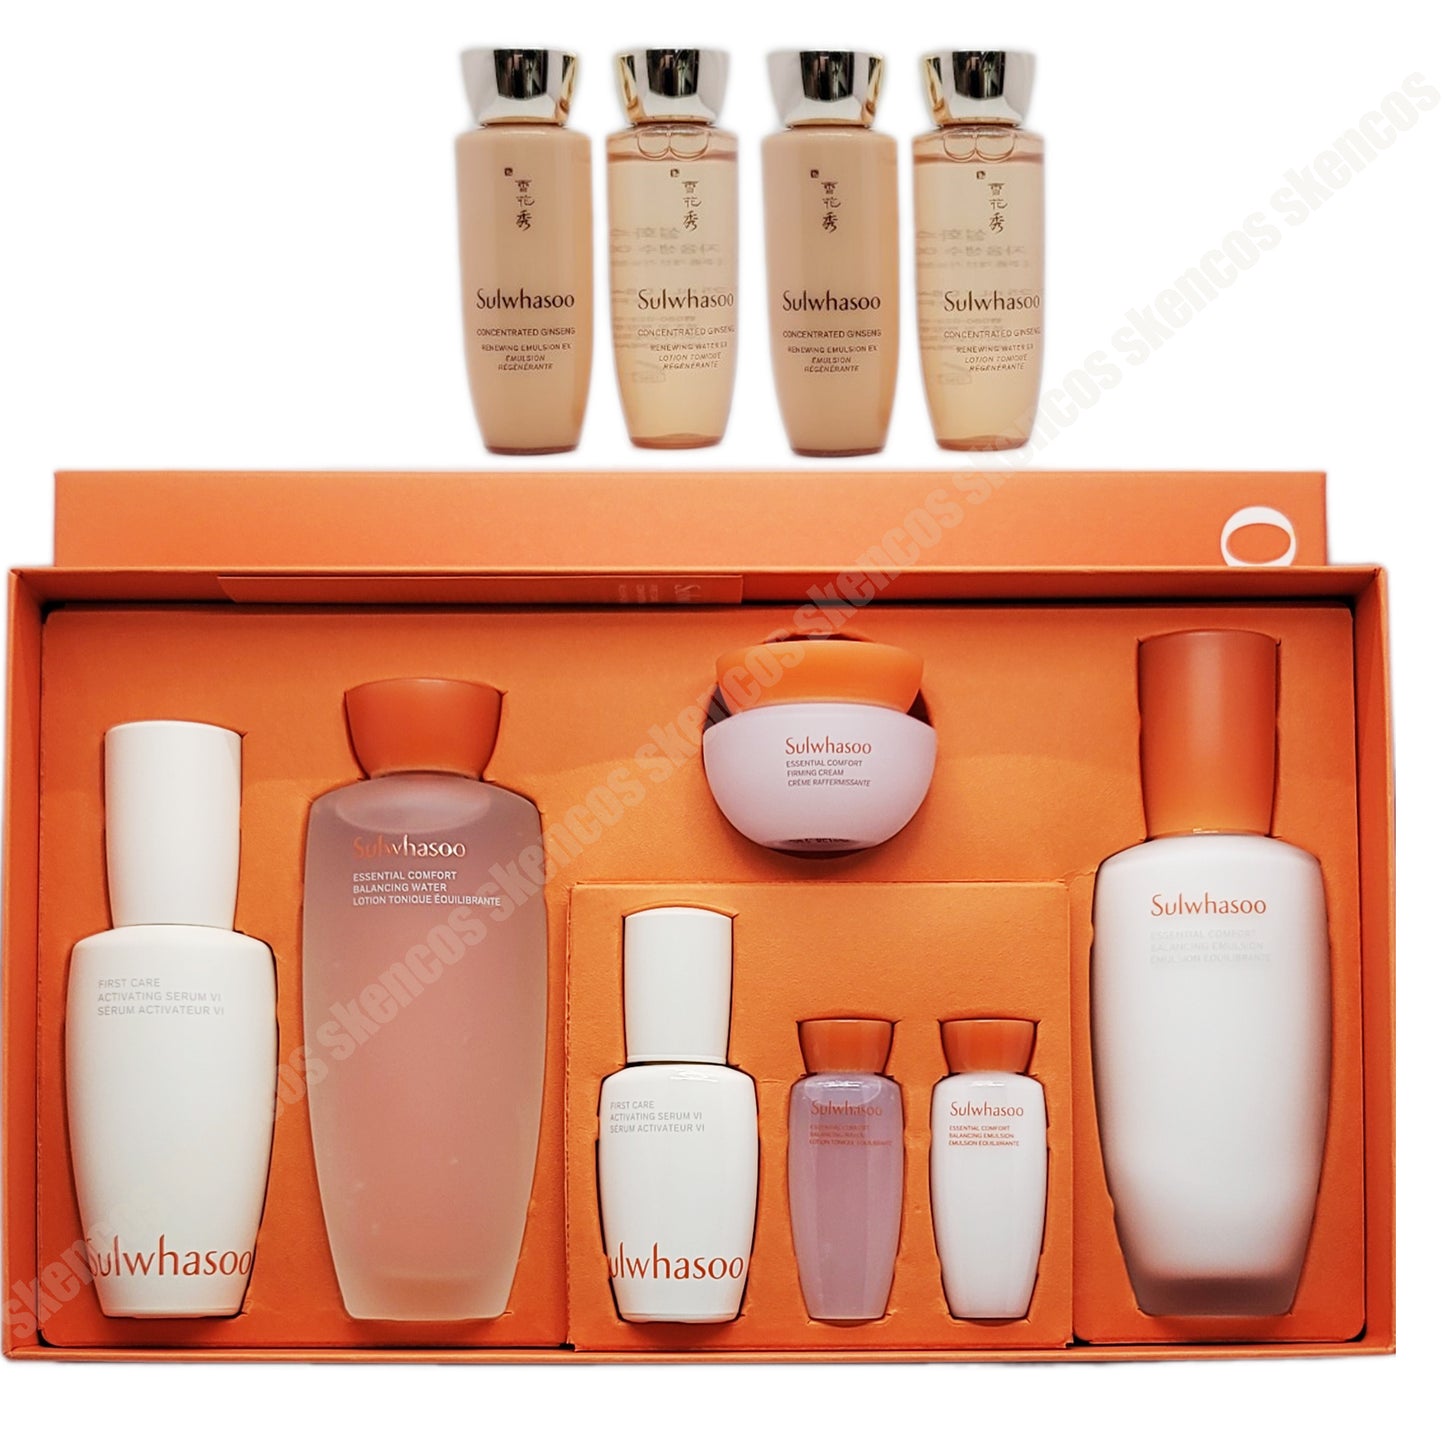 Sulwhasoo First Care Special Set+Ginseng Renewing Skincare Kits 25ml x 2 Sets